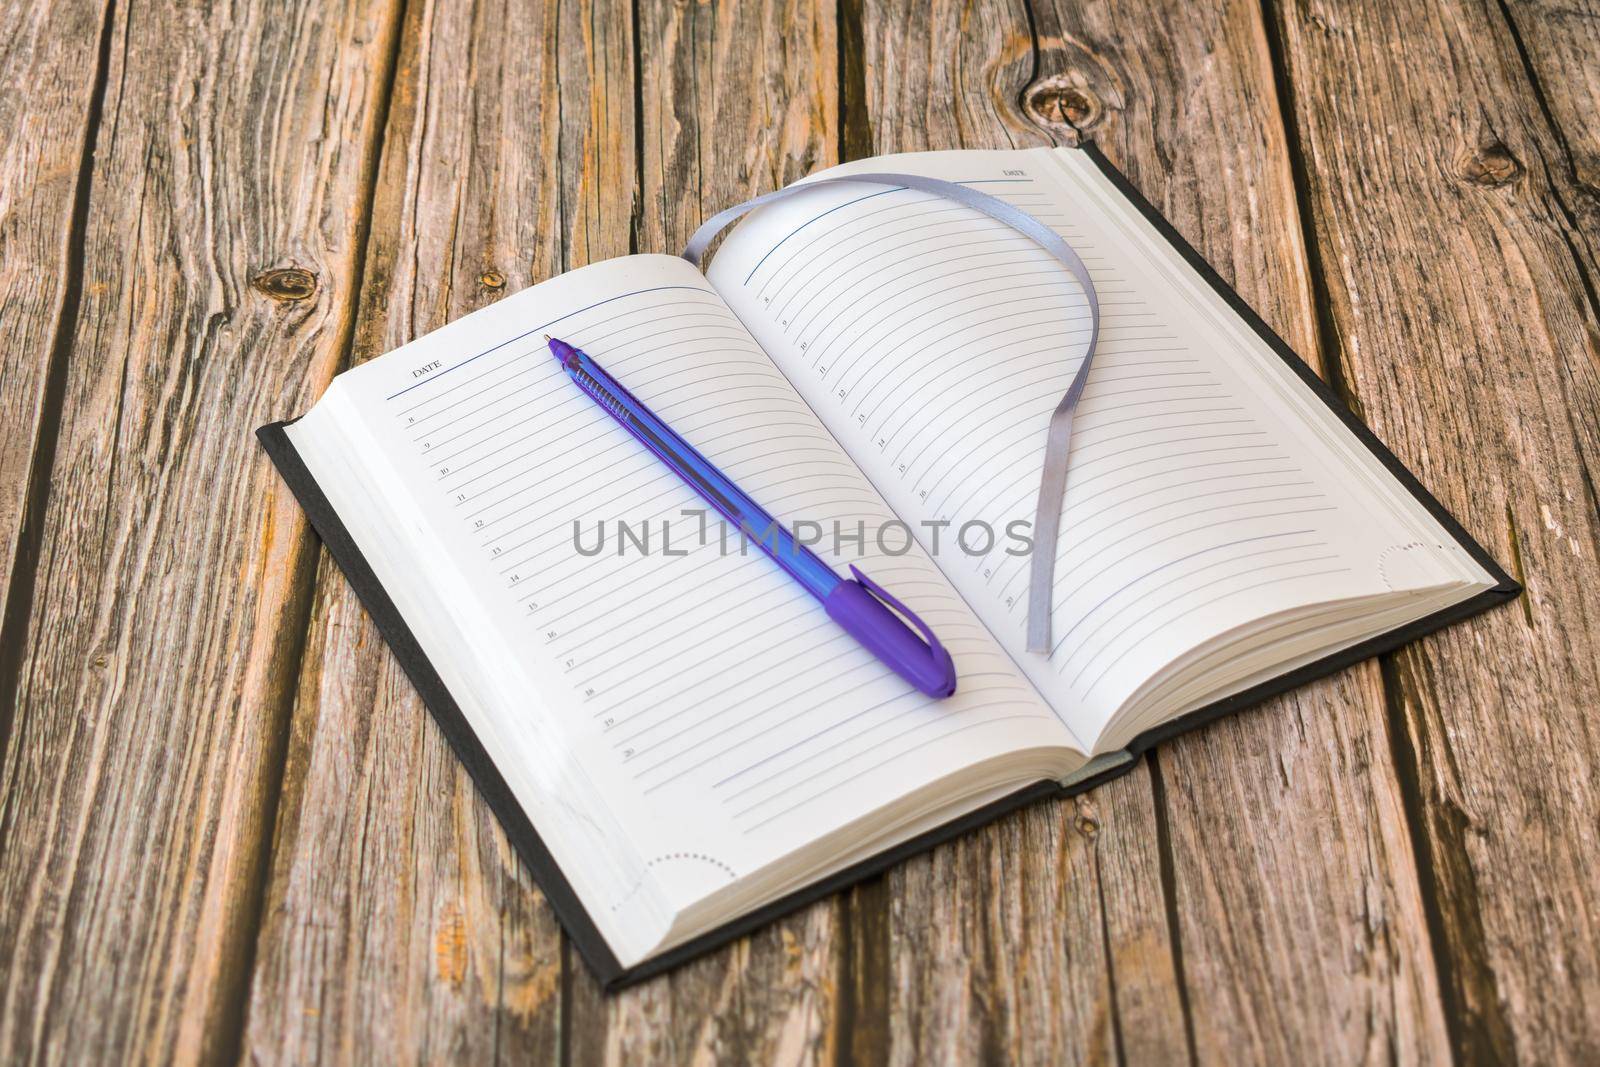 An open diary with blank pages on which a ballpoint pen rests, ready to record events or tasks